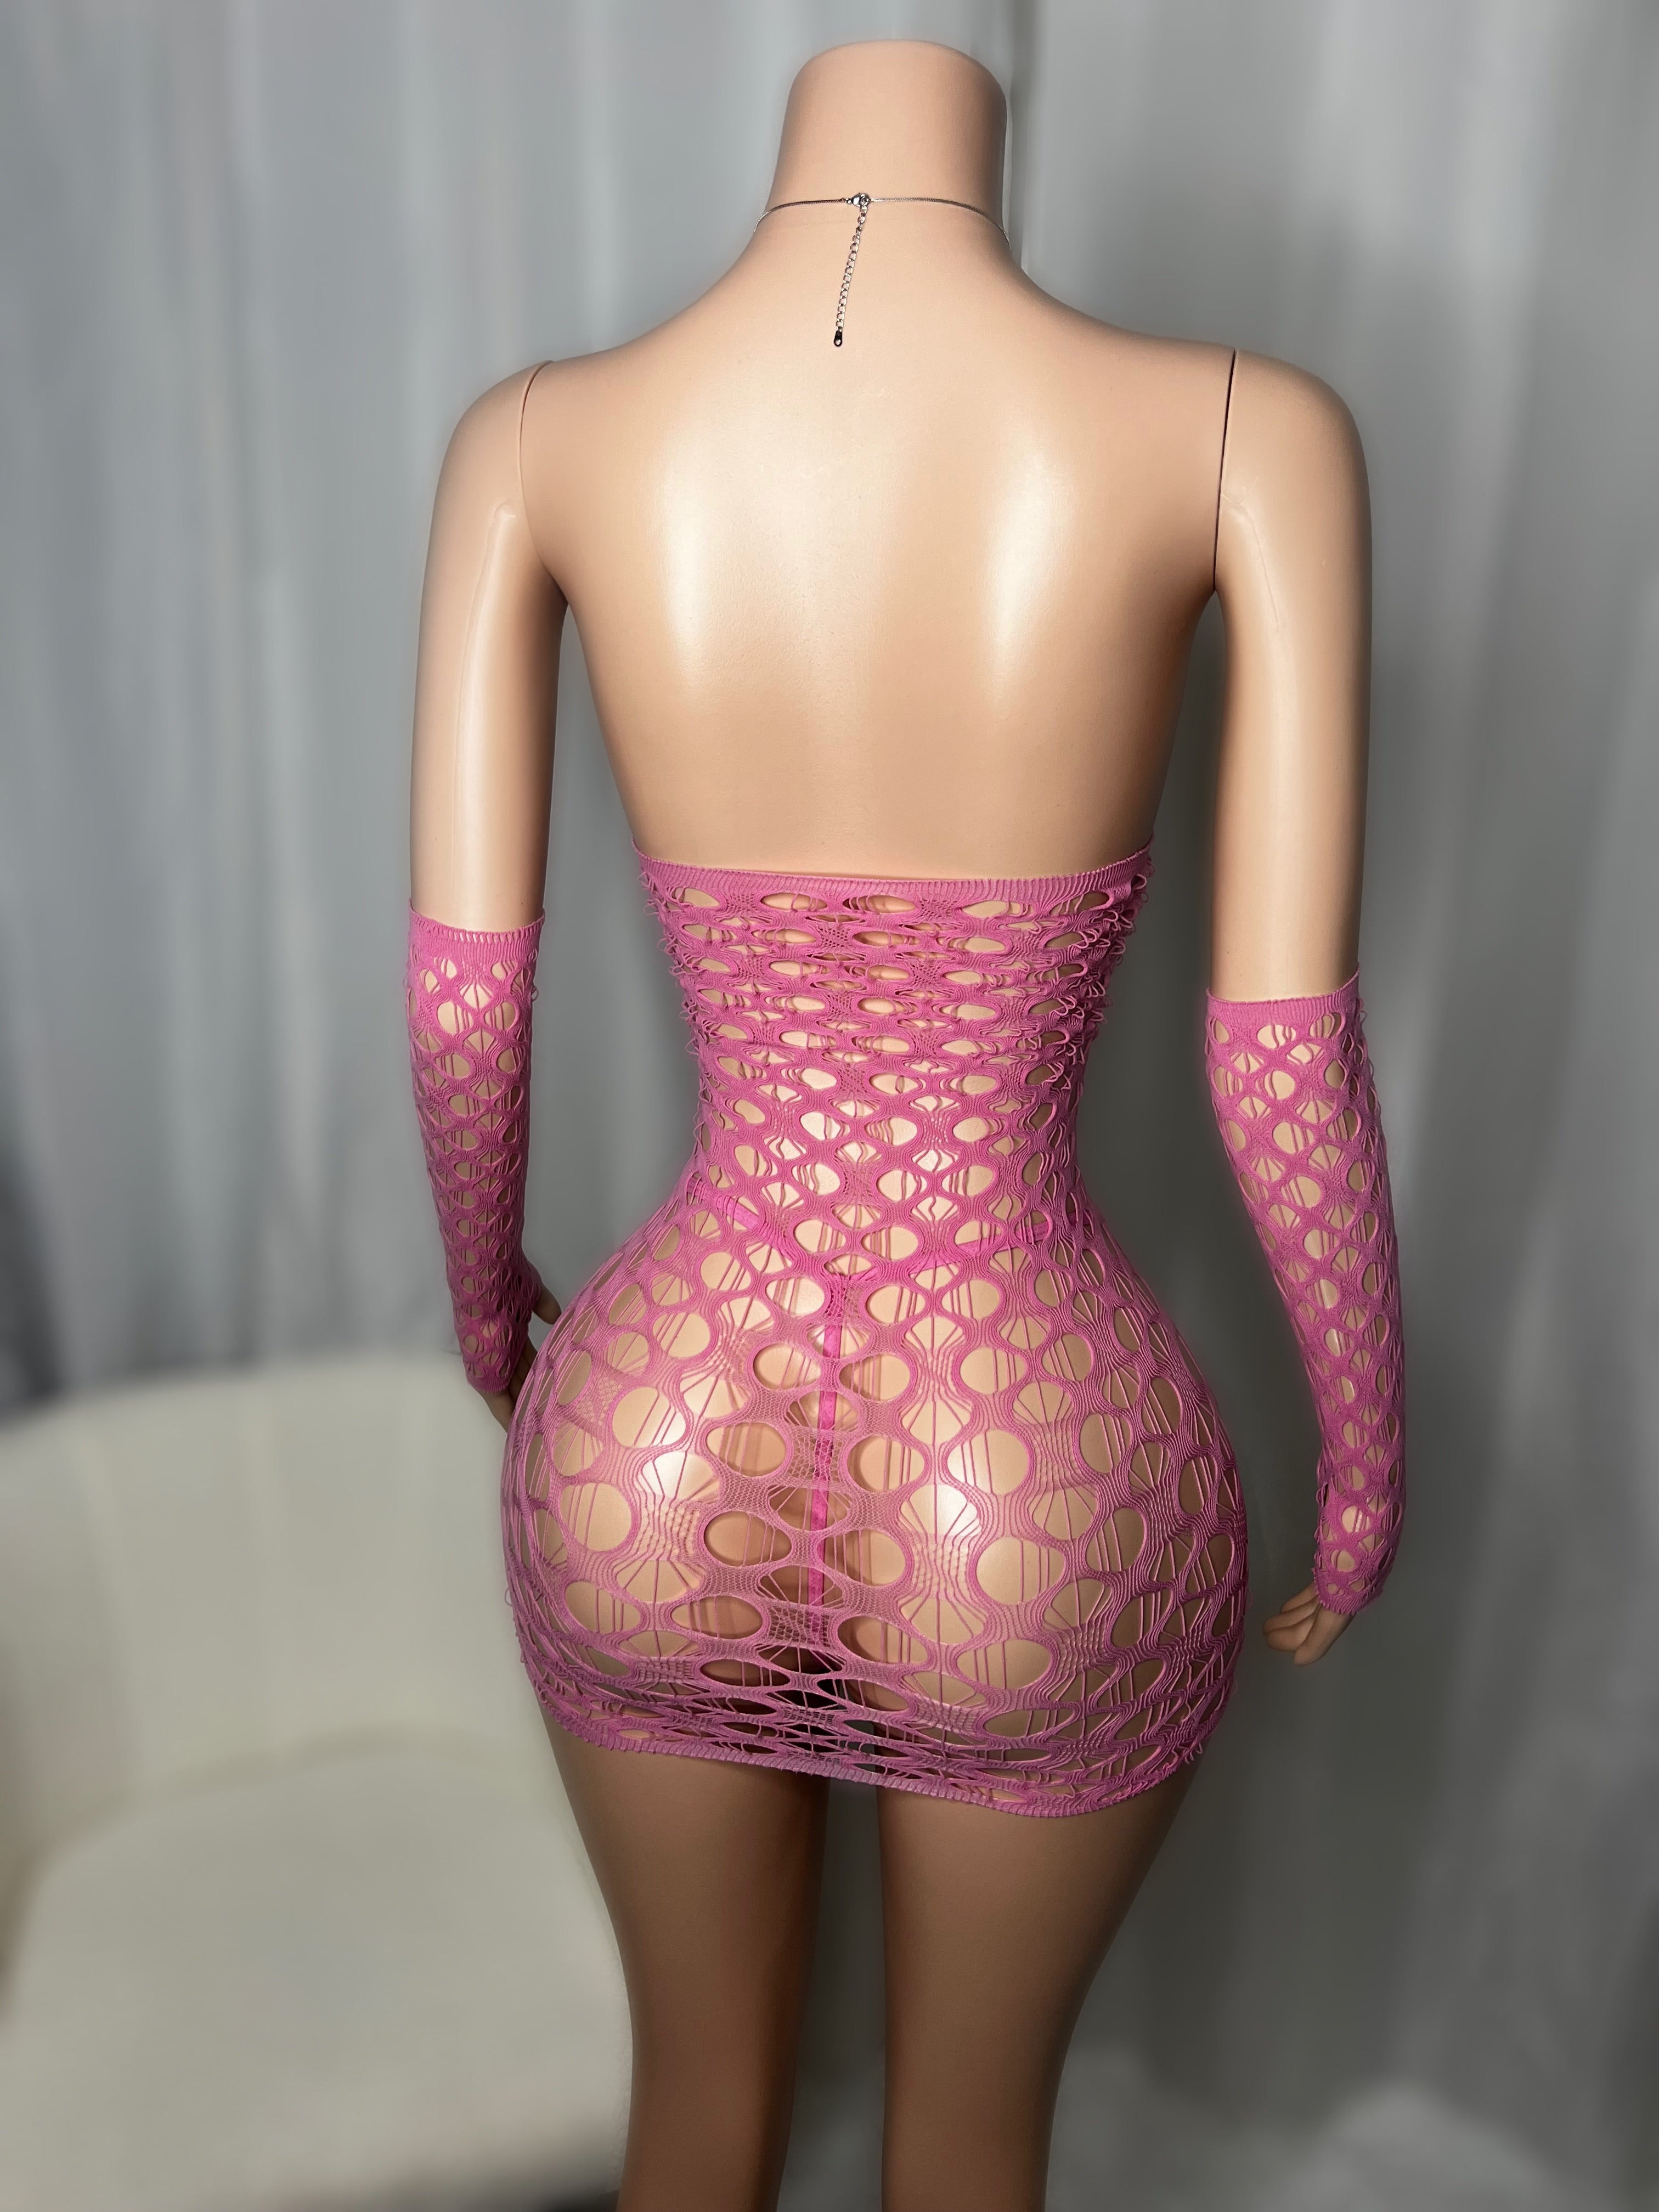 Only Fans Cut Out Mini Dress Pink